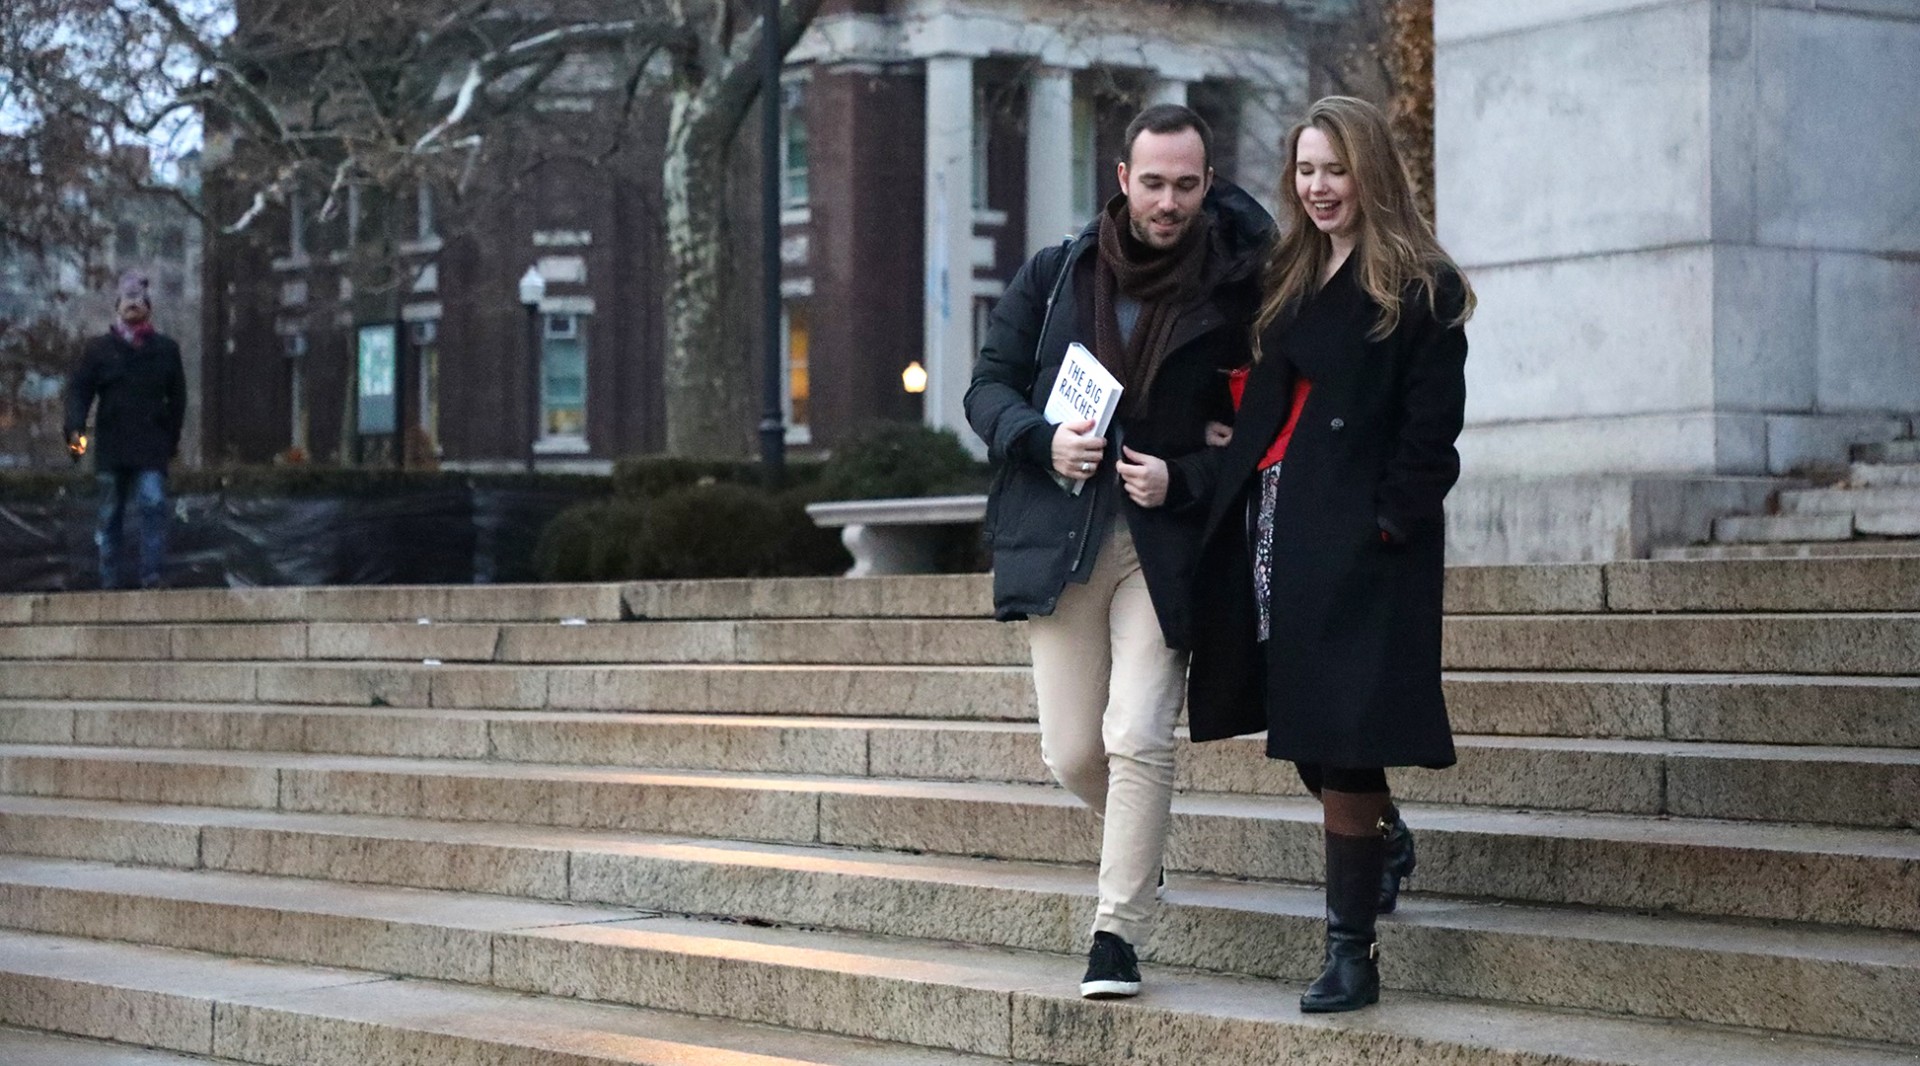 Sepp Panzer walks to class on the Columbia University campus with Genevieve Shaw Grant, Dual BA Program student